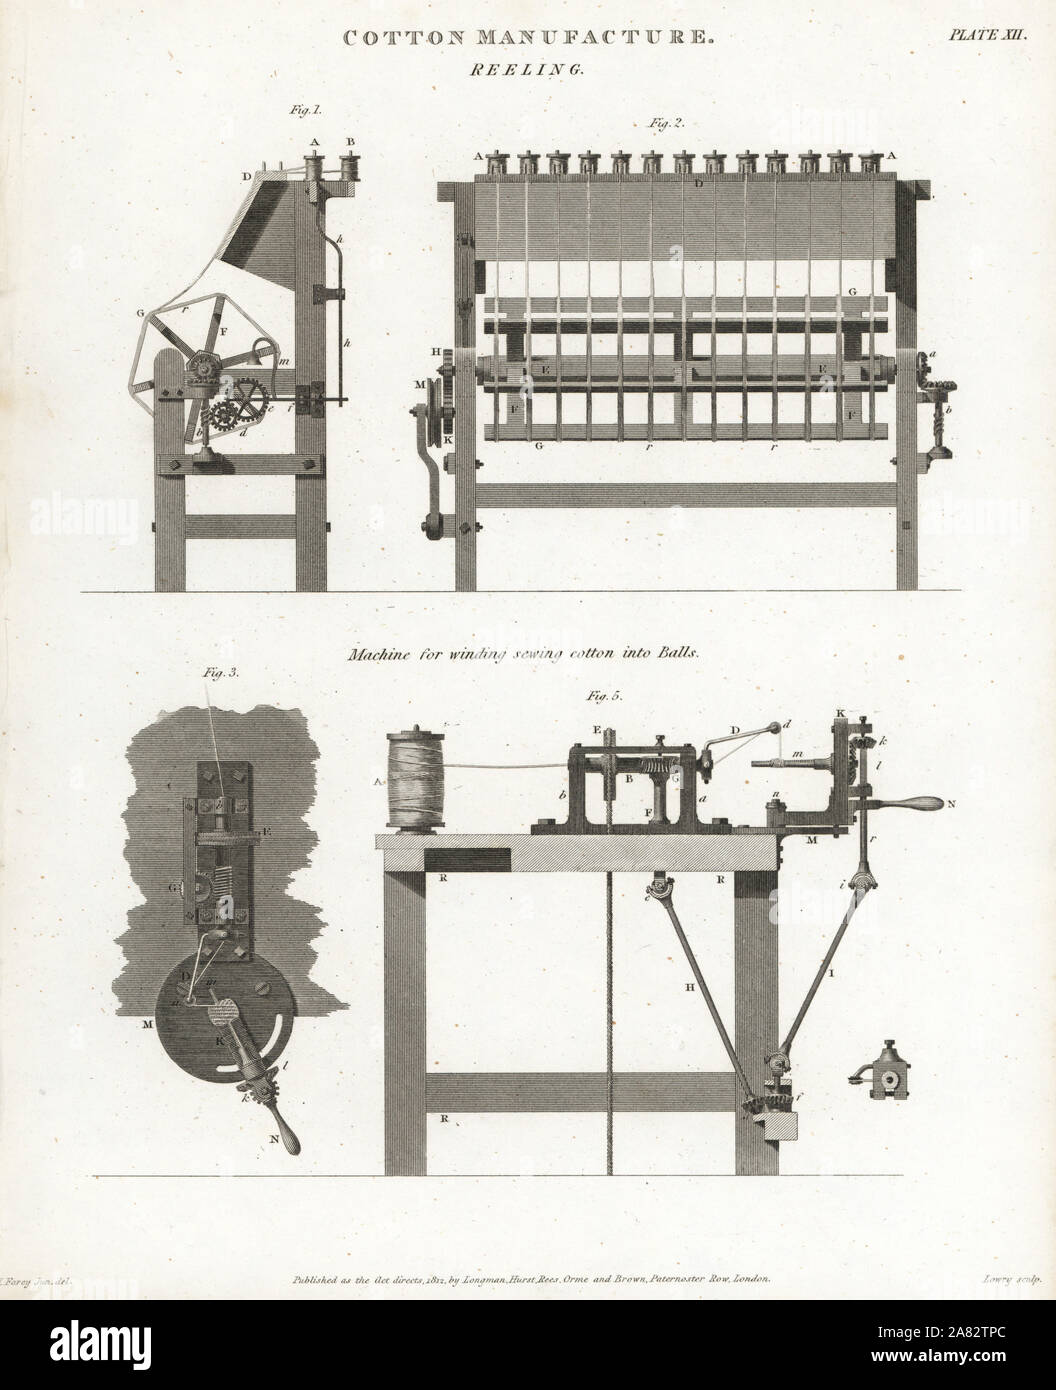 Elevations of a reeling machine for winding sewing cotton into balls in cotton manufacture, 18th century. Copperplate engraving by Wilson Lowry after a drawing by John Farey Jr. from Abraham Rees' Cyclopedia or Universal Dictionary of Arts, Sciences and Literature, Longman, Hurst, Rees, Orme and Brown, London, 1812. Stock Photo